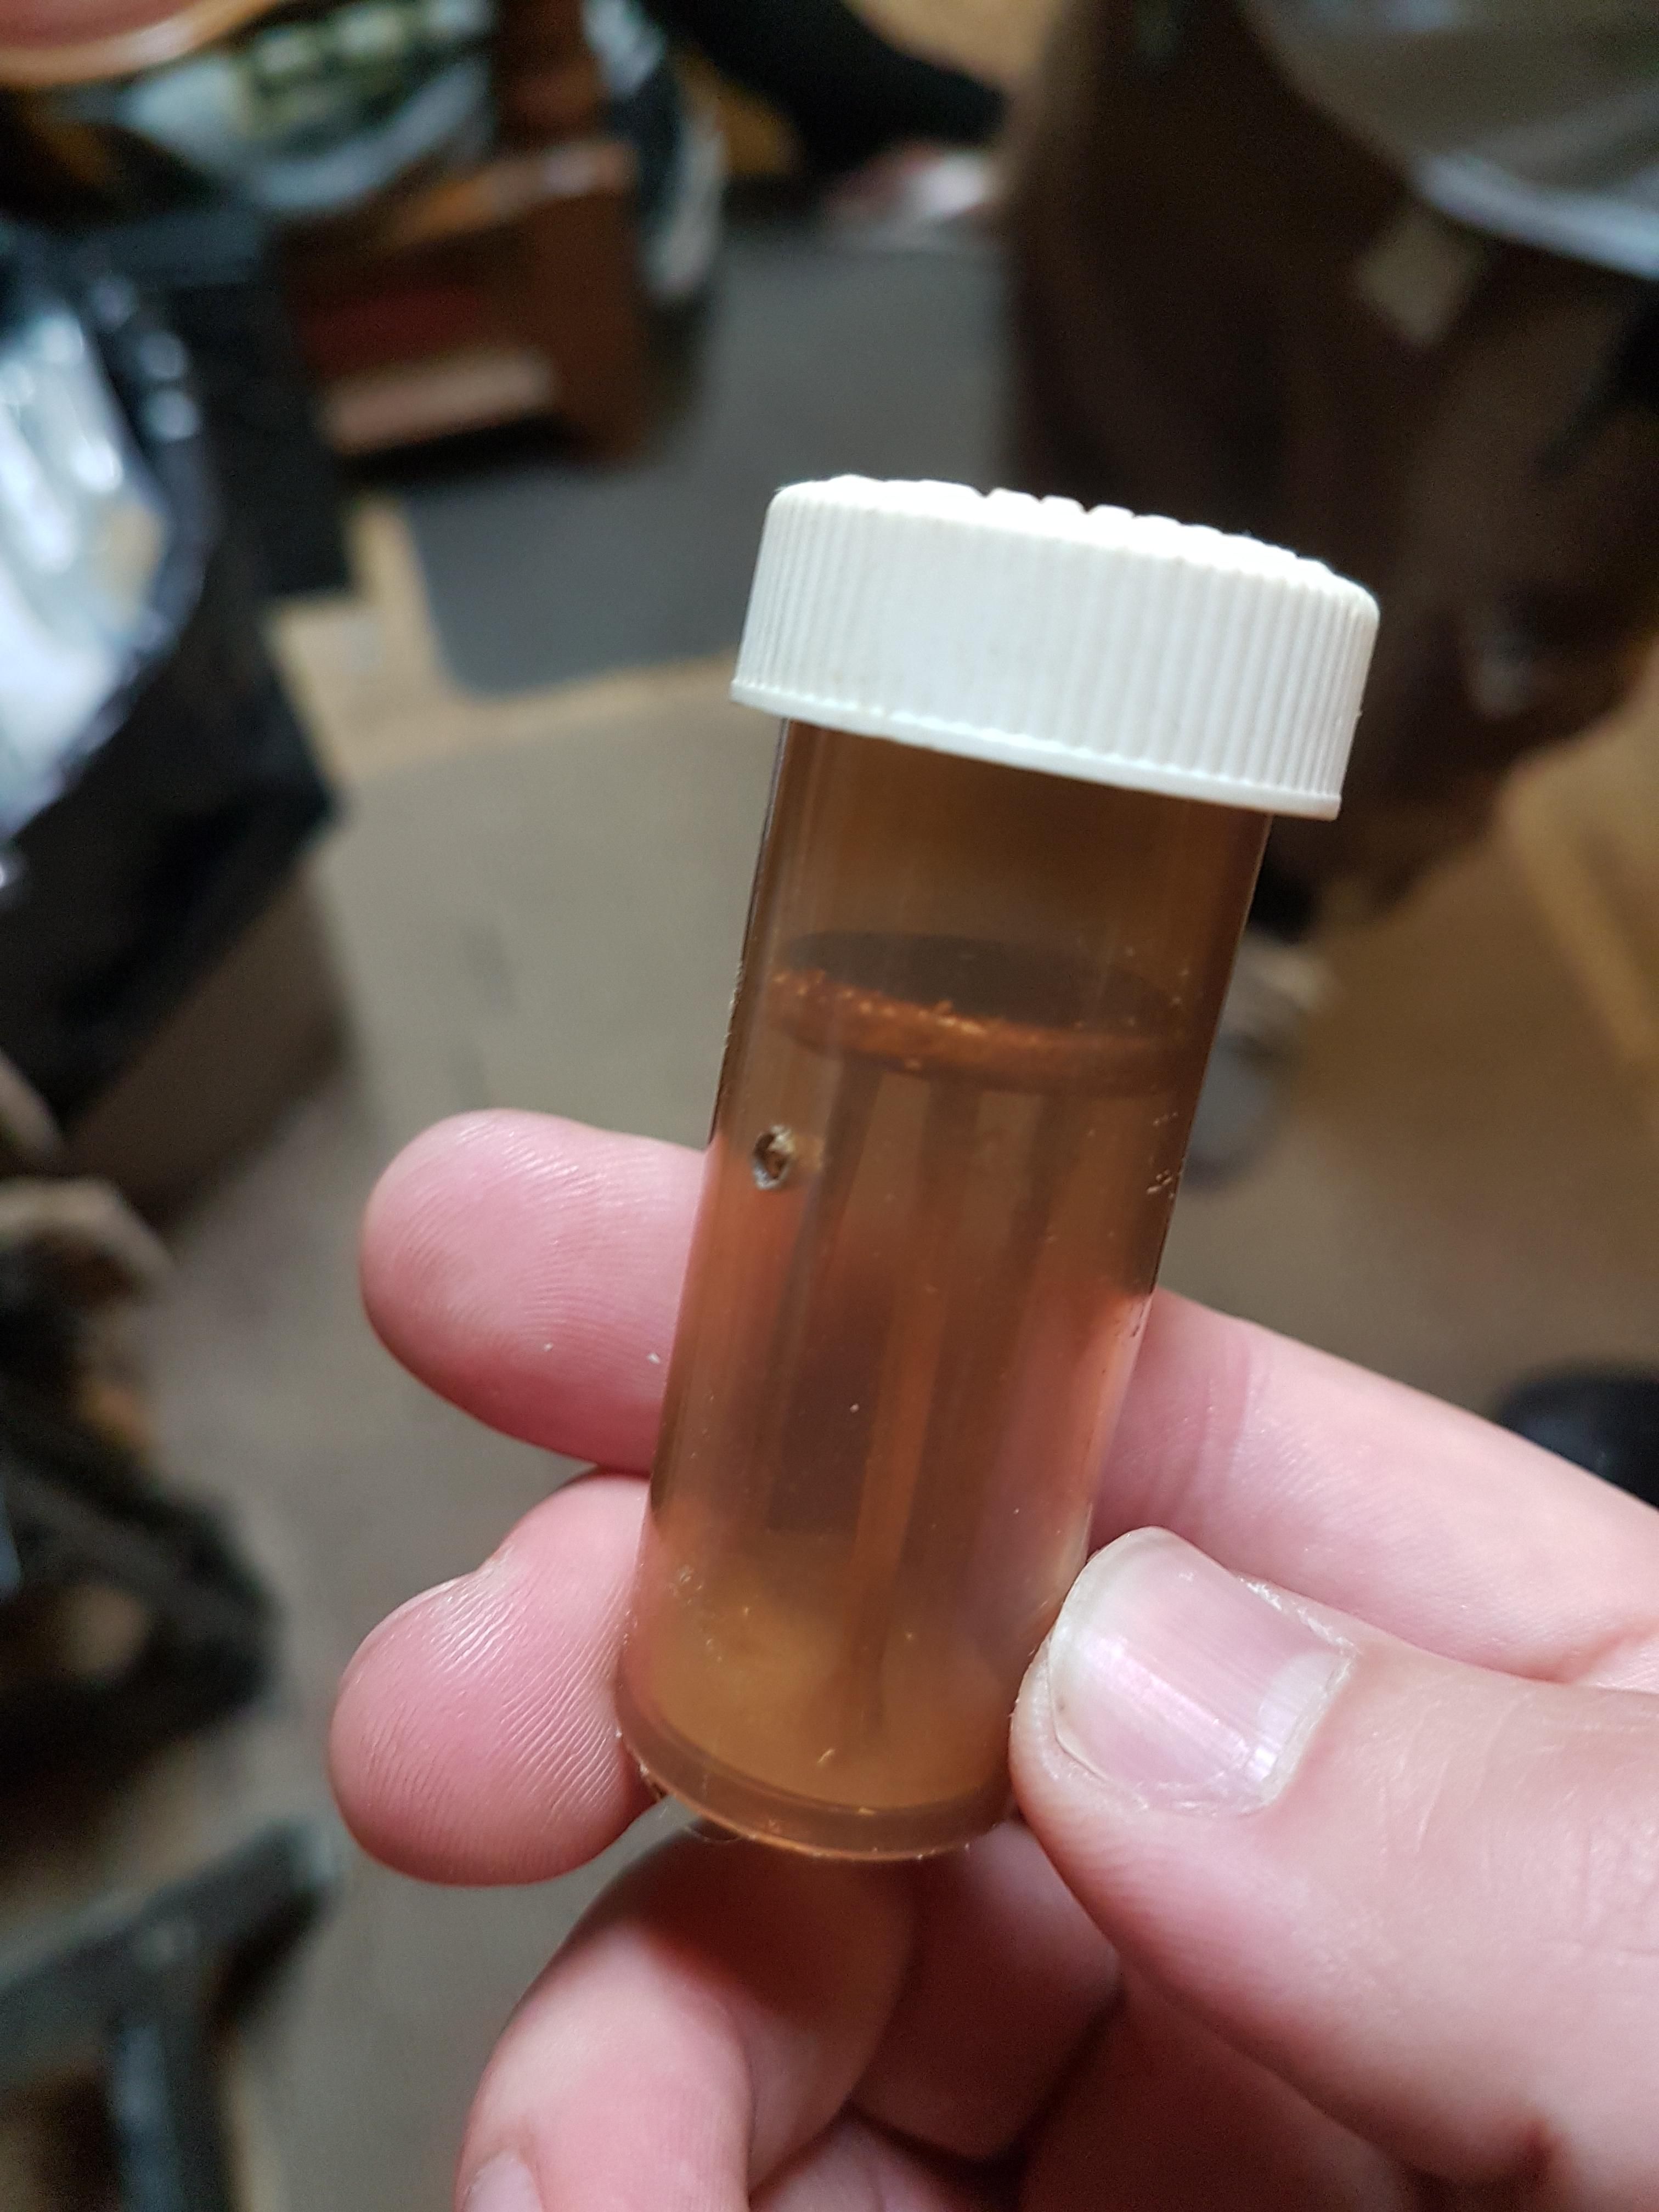 My brother hands me this last night. Apparently it was my grandfather's. It's his stool sample.